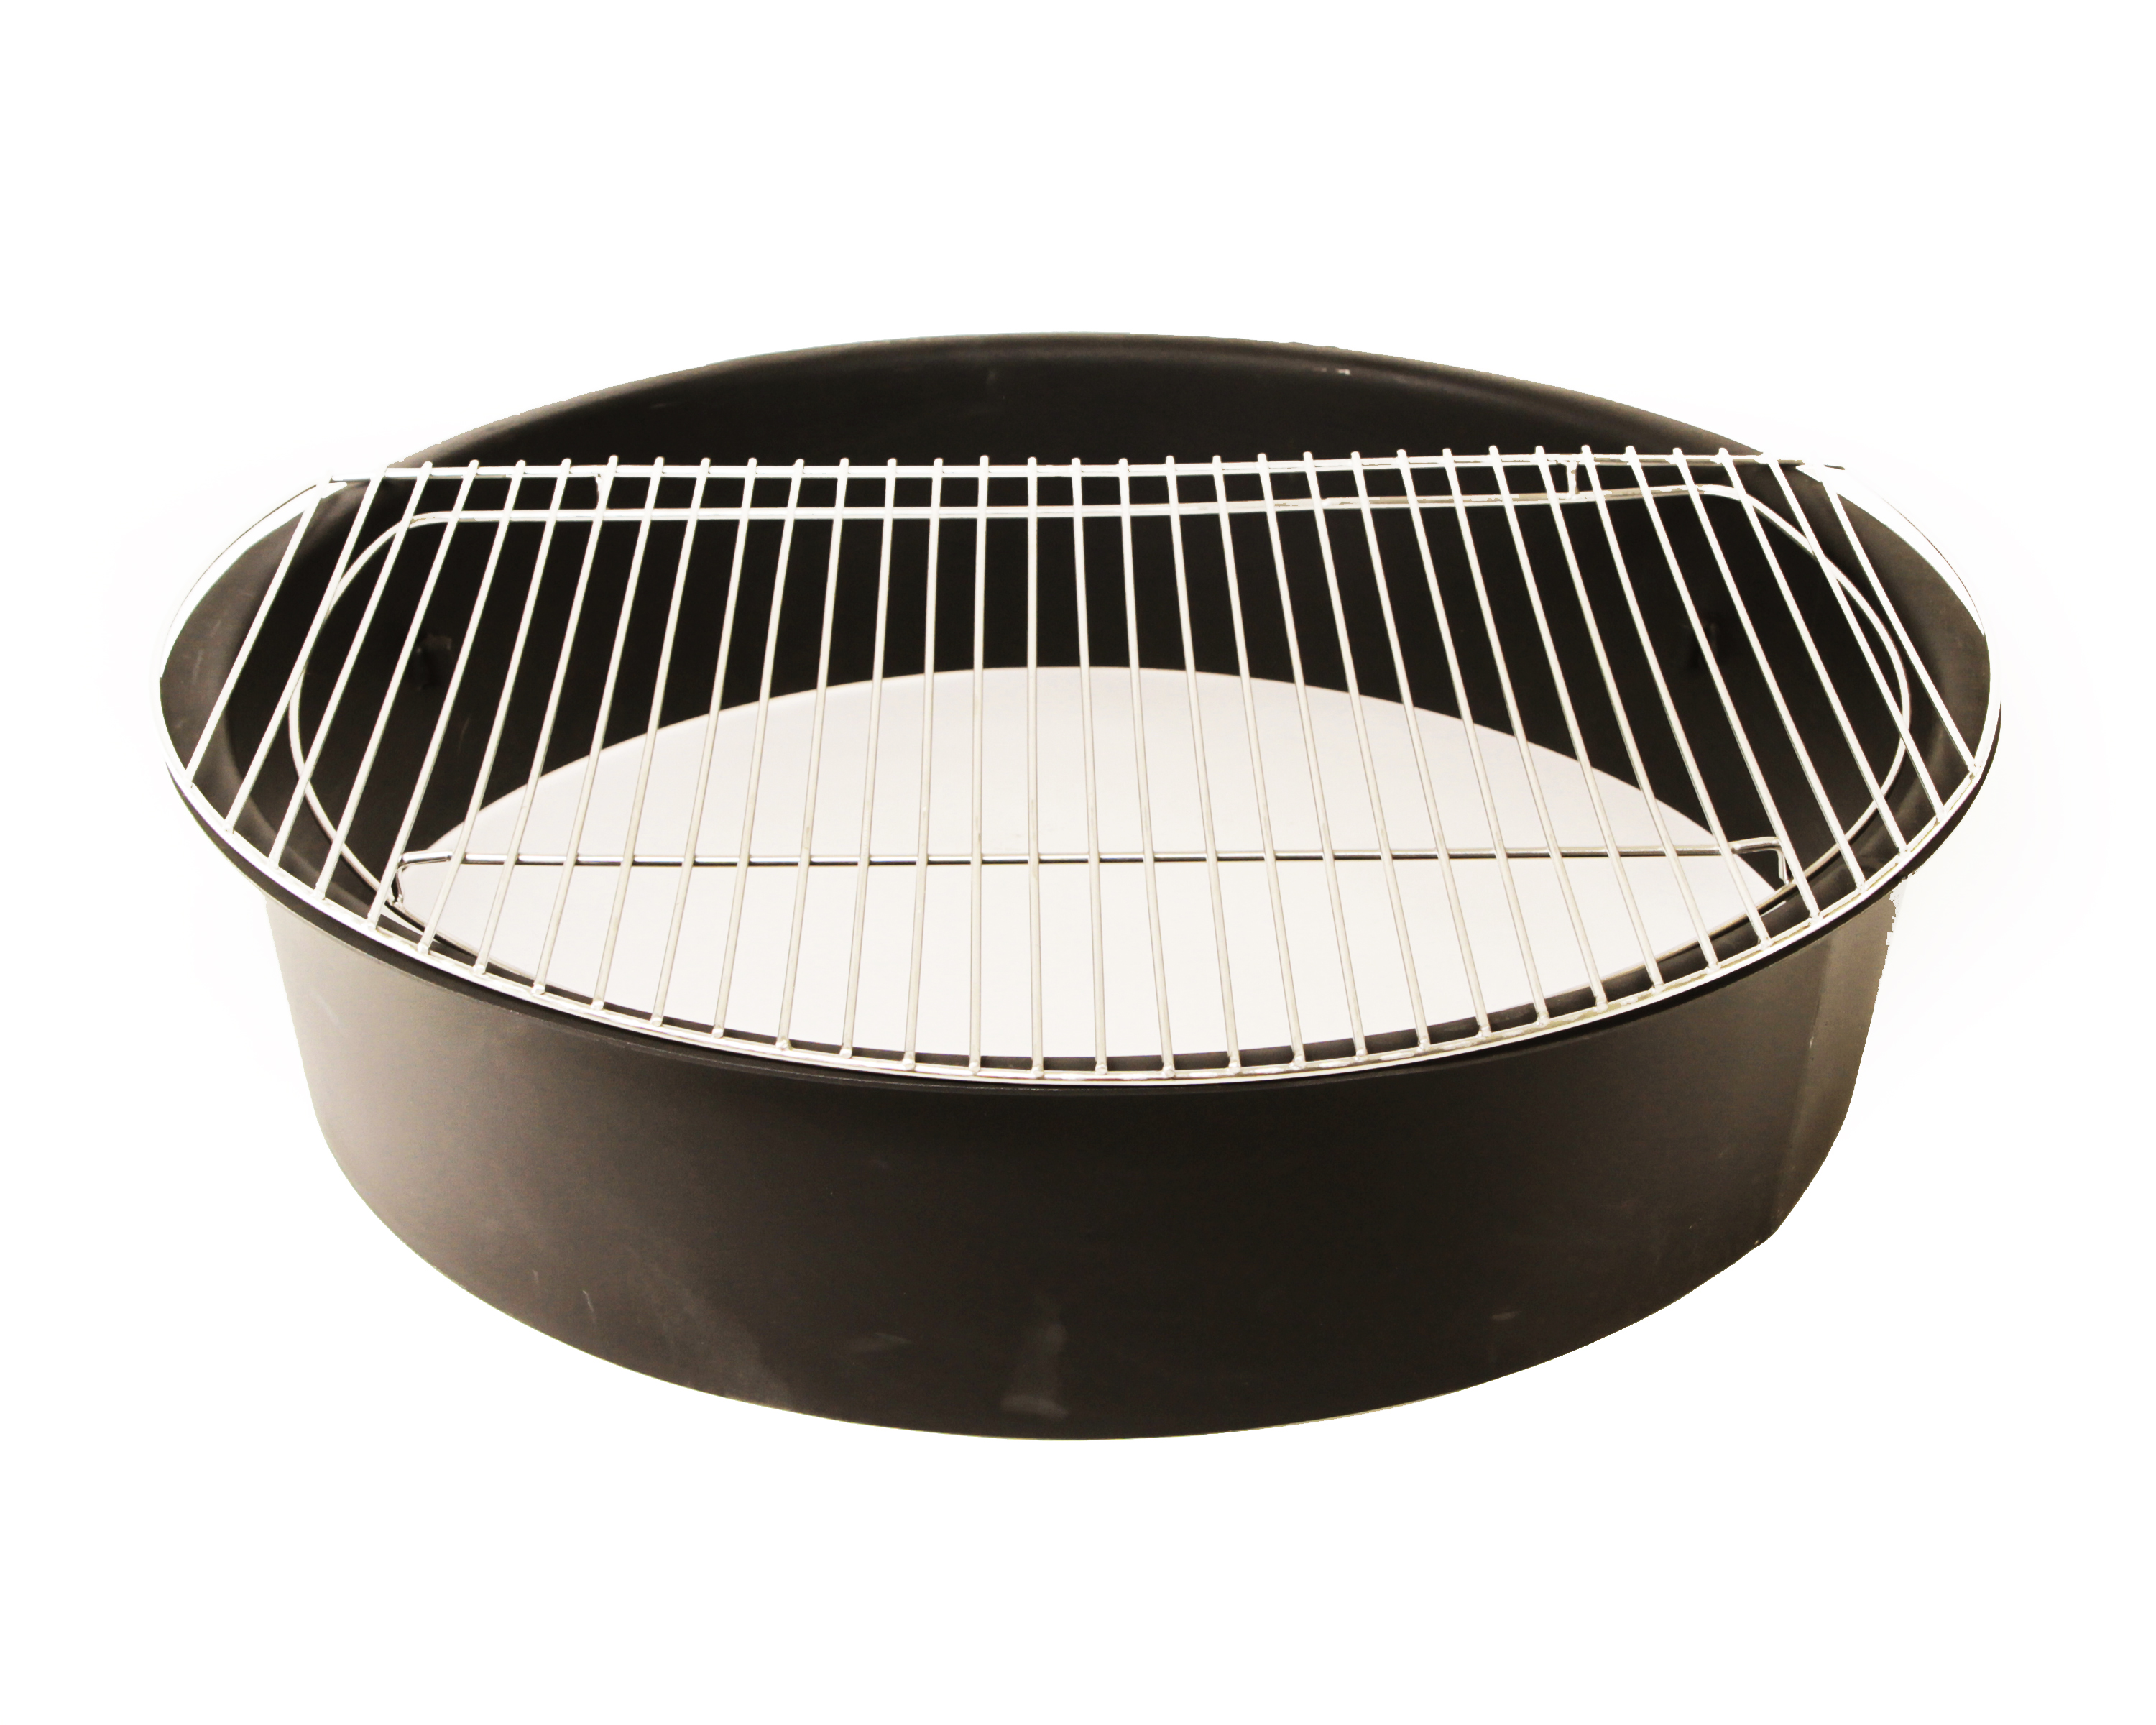 Stainless Steel Round Cooking Grates – The Firepit Source